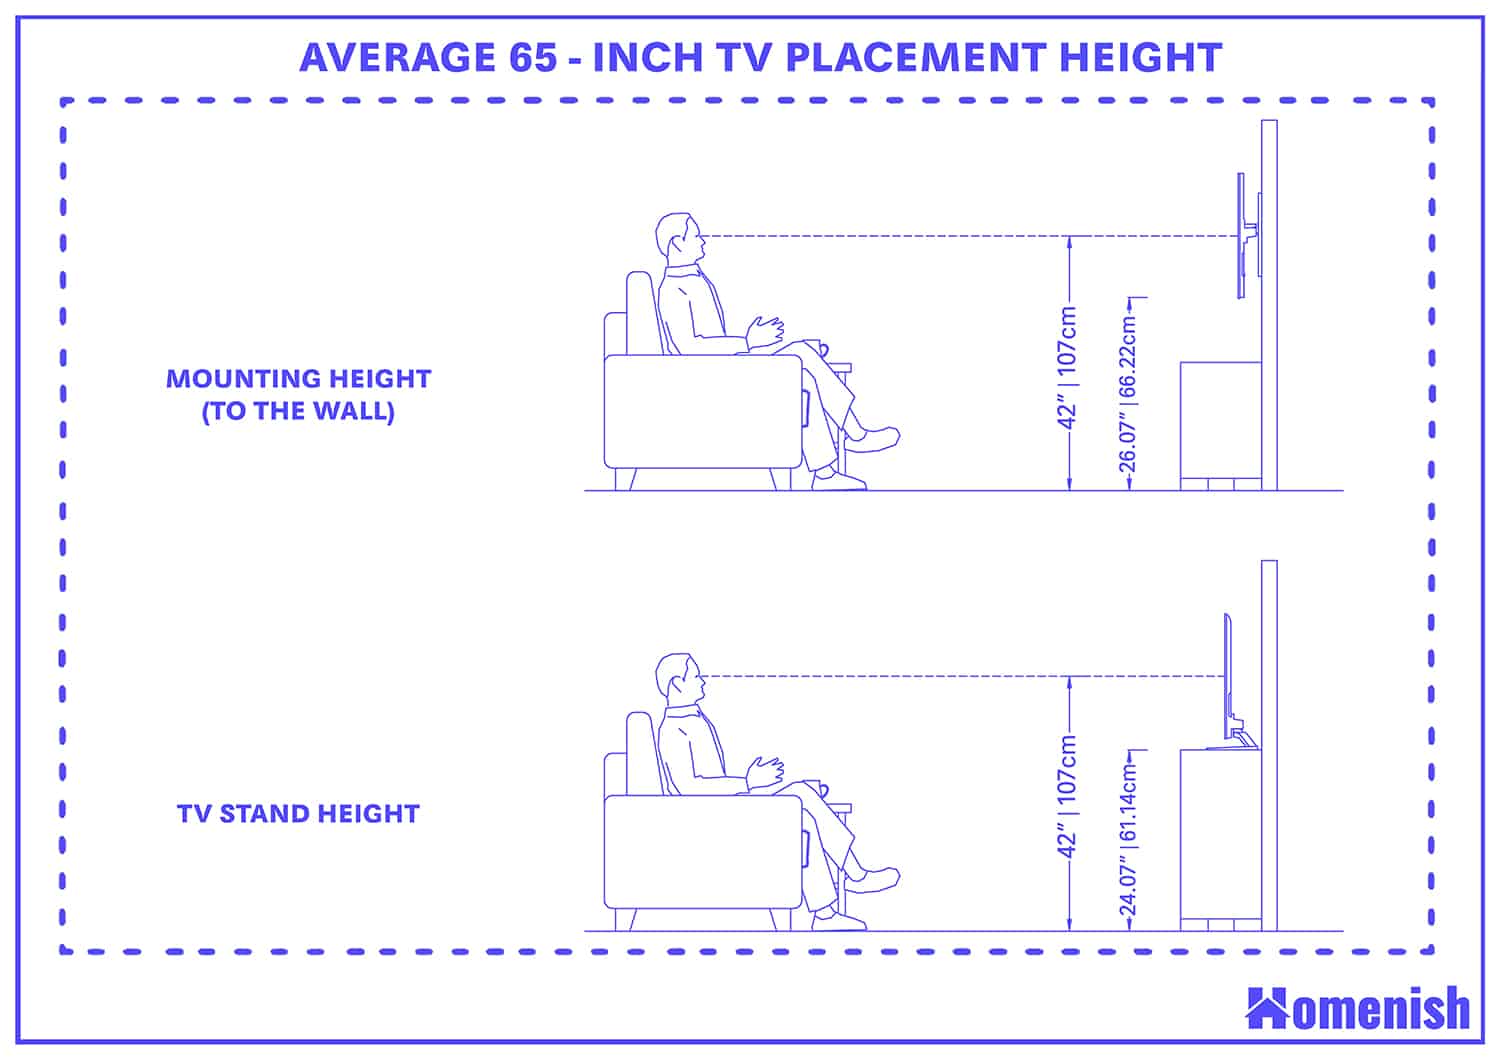 65-inch TV Television Placement